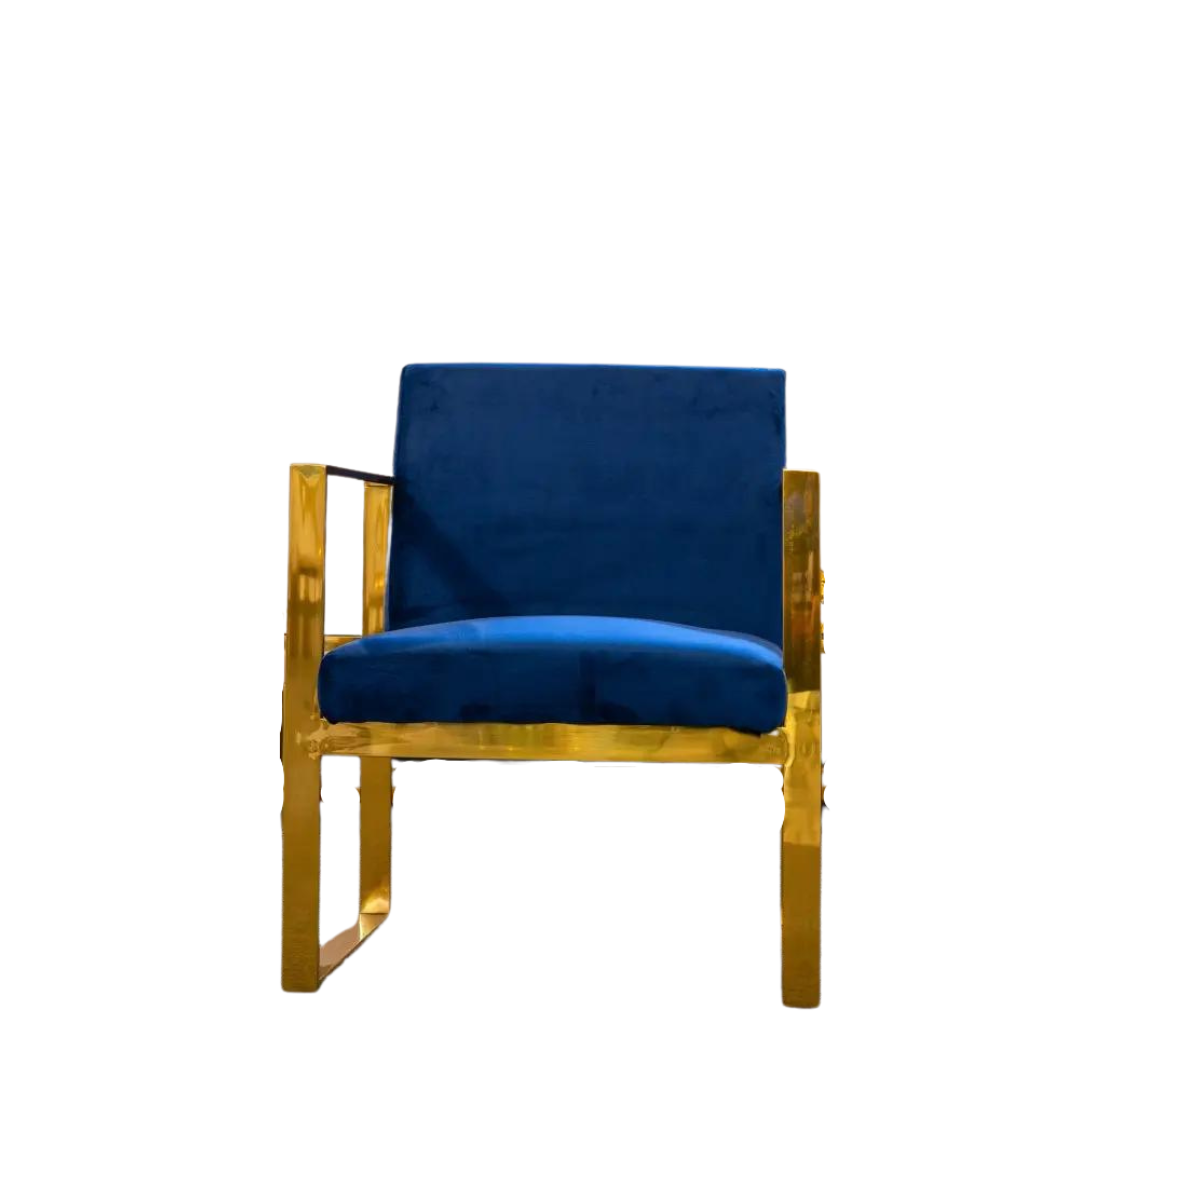 gold-navy-armchair-front-side-view